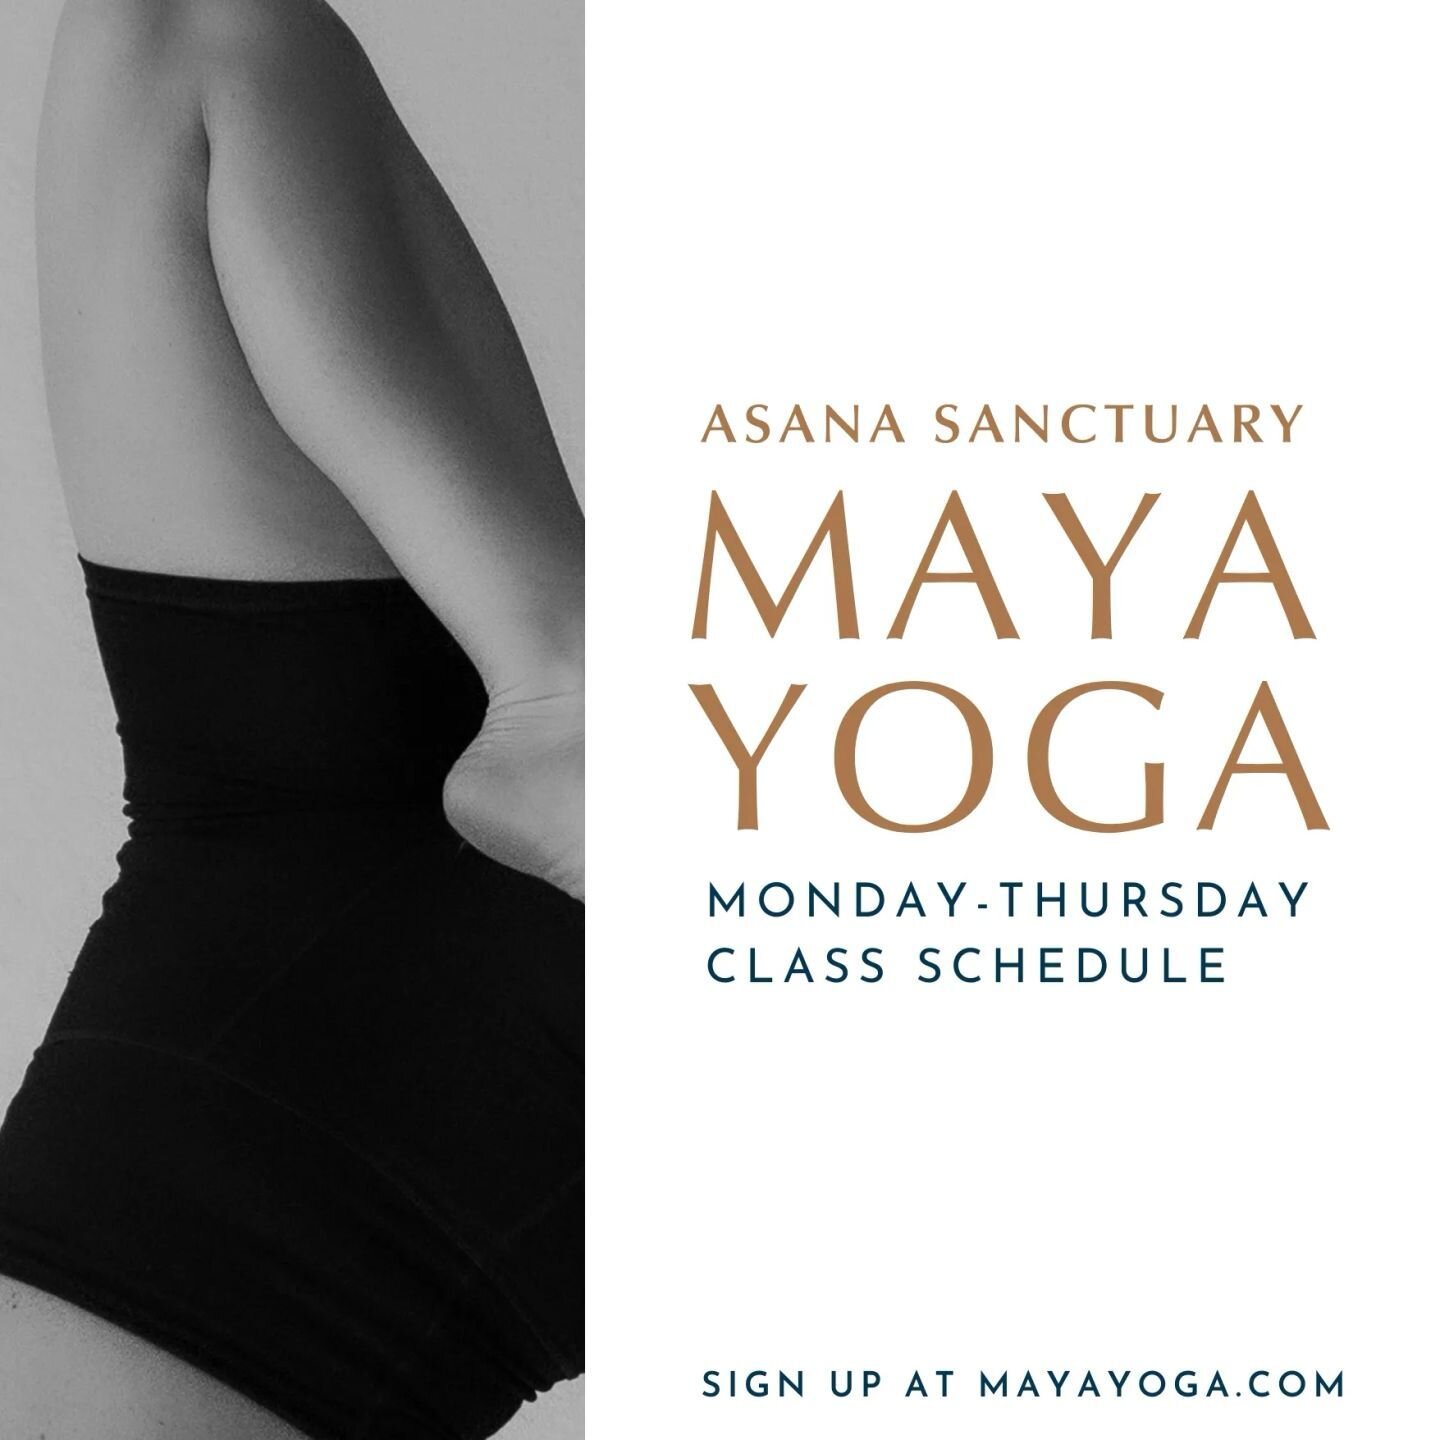 Ashtanga unfolds slowly, teaching us to feel the breath moving the body from within. 
See you in class this week! 
 
MON-THURS CLASS SCHEDULE 
 
MONDAY/WEDNESDAY 
7:00 am - 9:00 am 
Mysore with Kyra @@kyralyn 
- 
12:00 pm - 12:50 pm 
Ashtanga with Ki